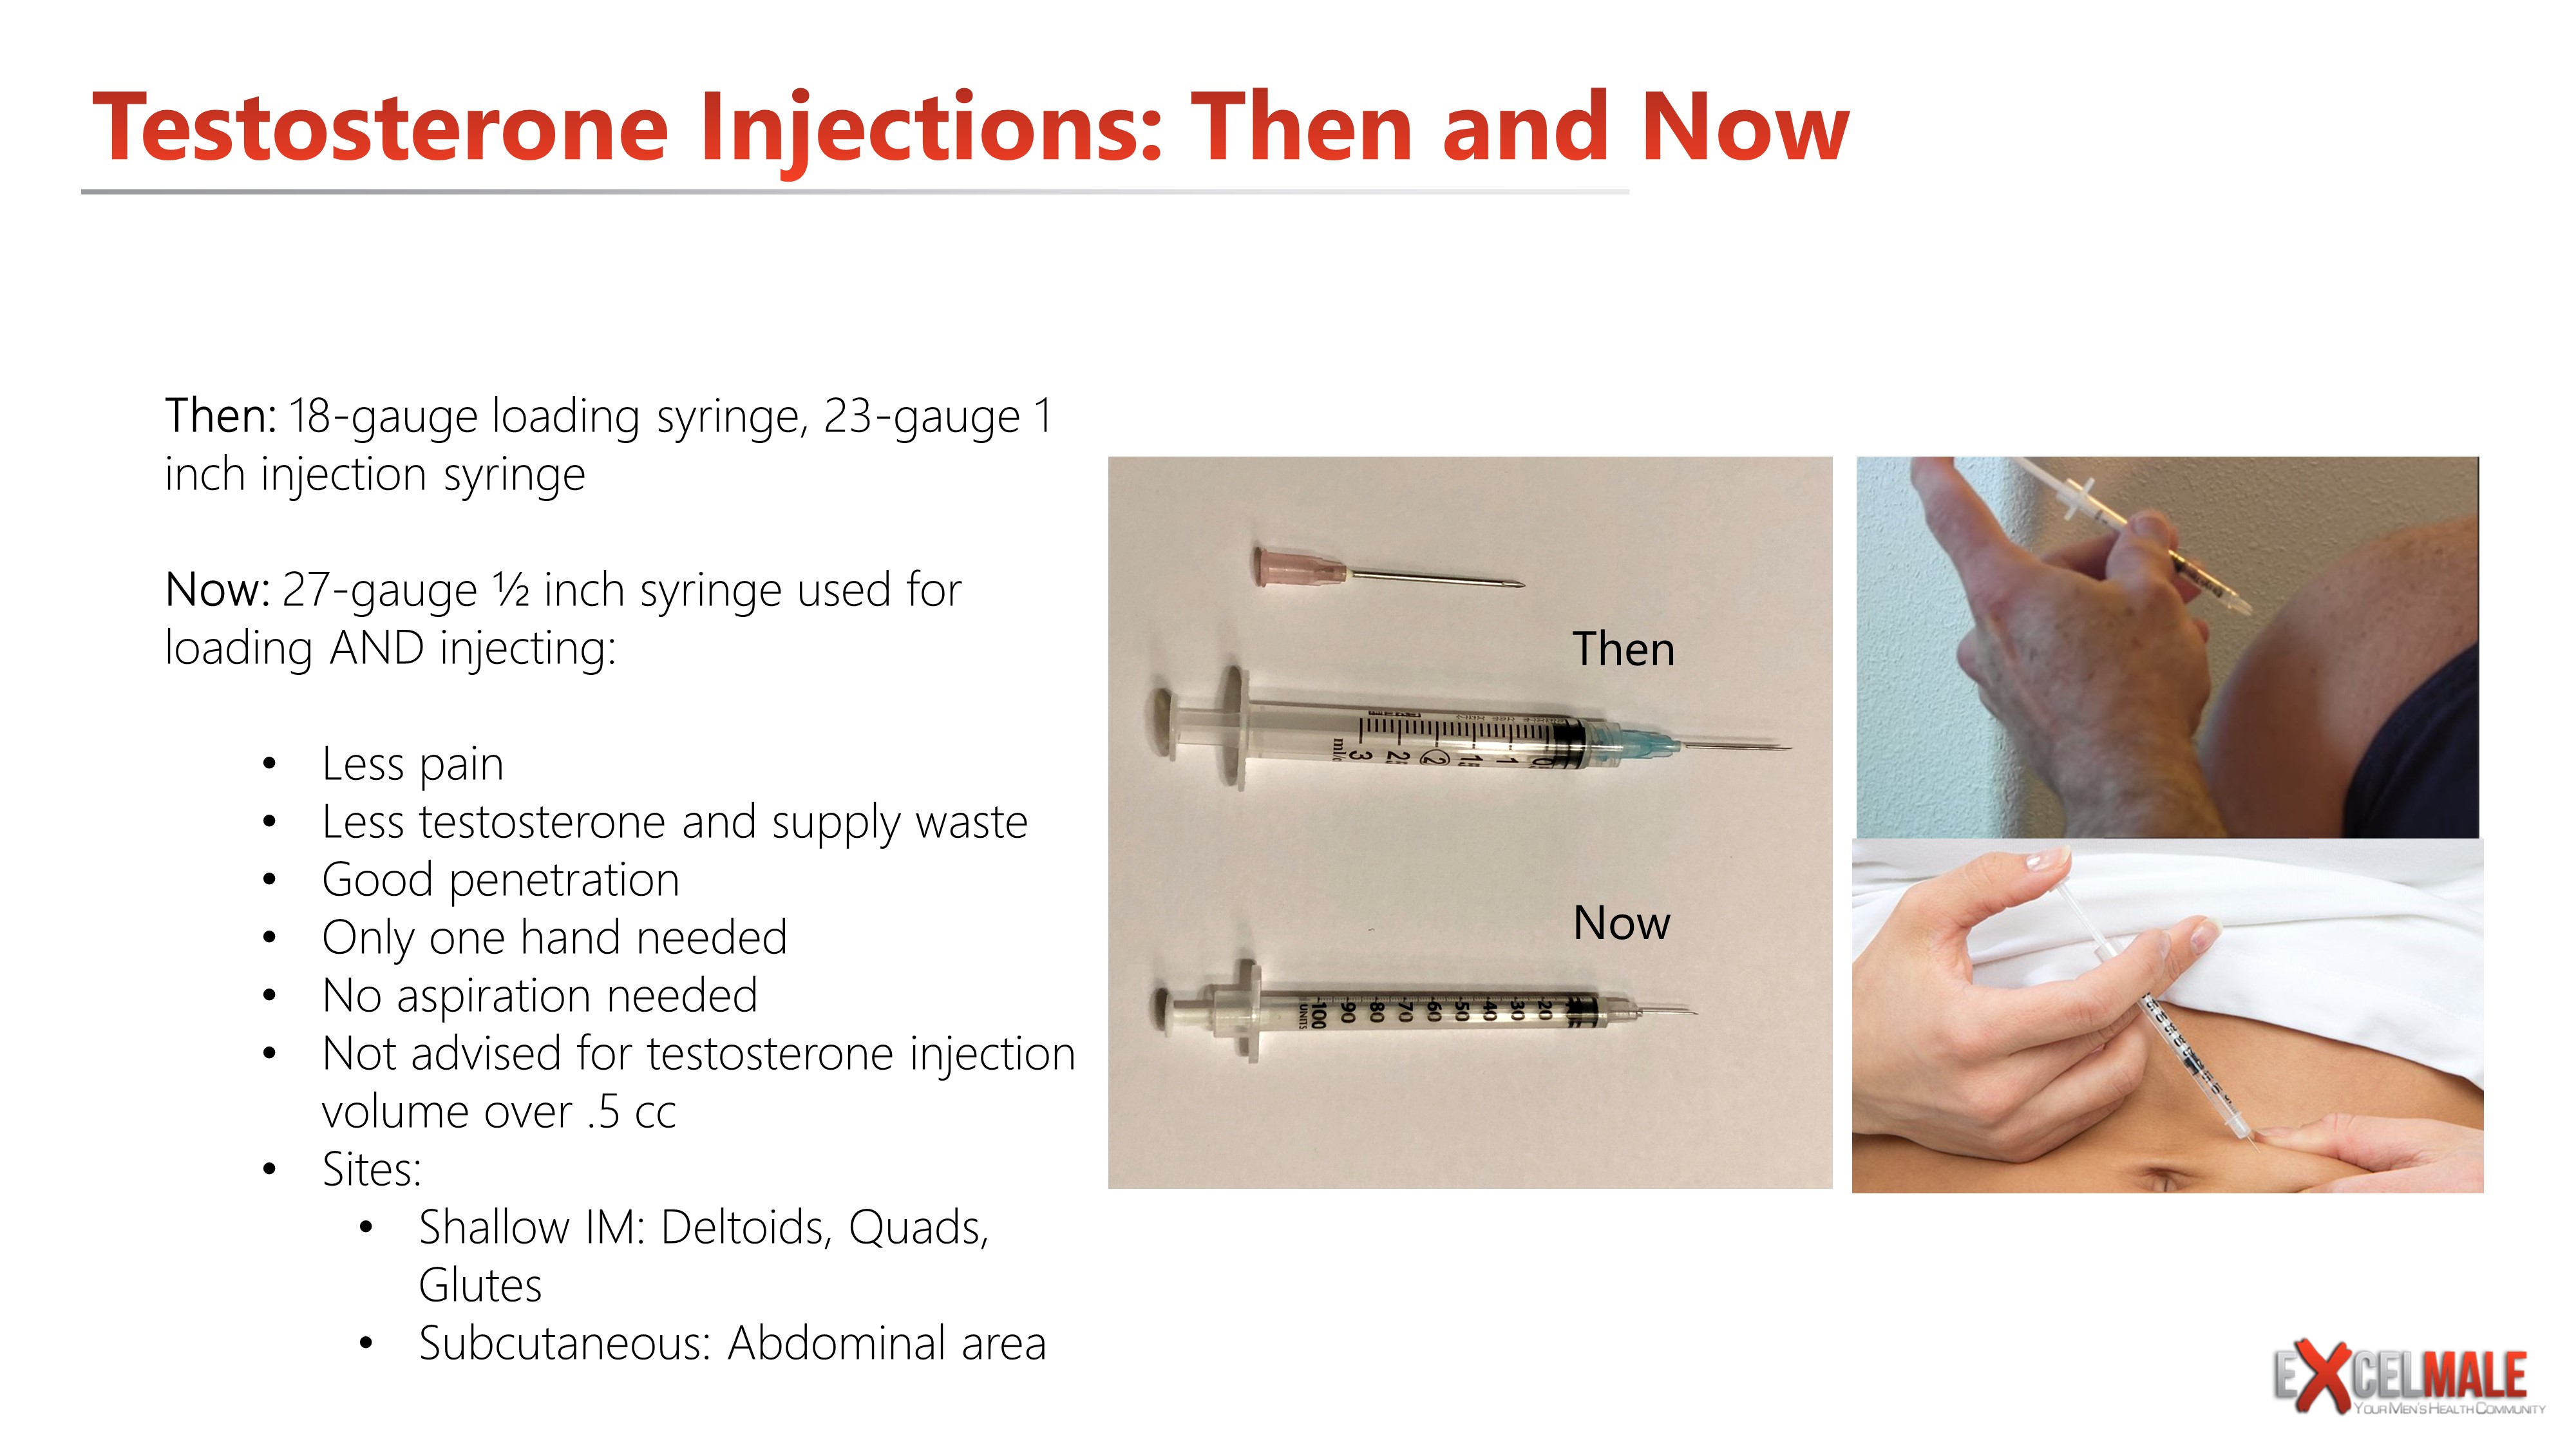 testosterone injections old and new methods.JPG